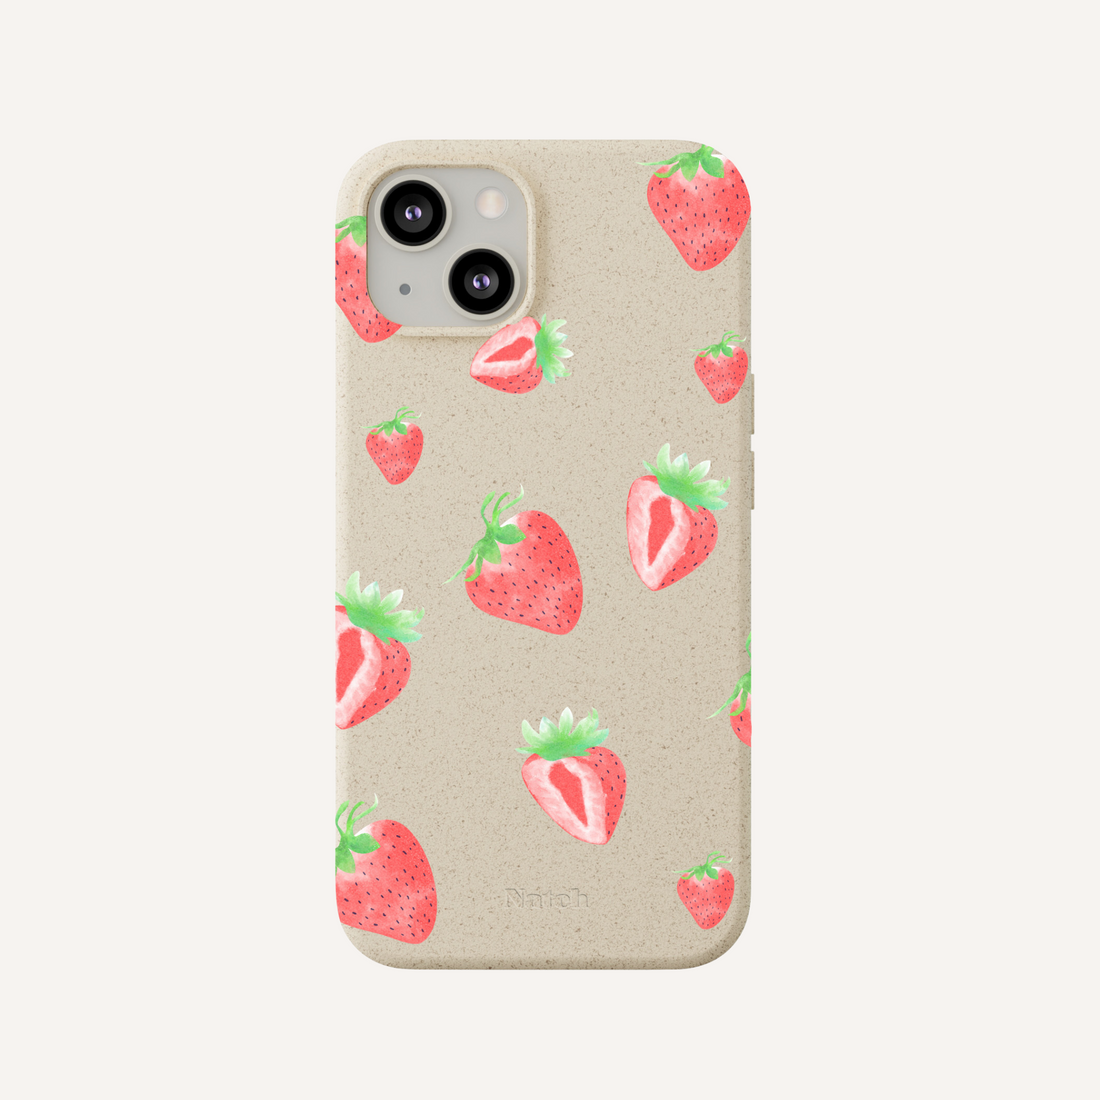 iPhone Cases - Eco-Friendly Phone Cases For iPhone - Nátch – Natch